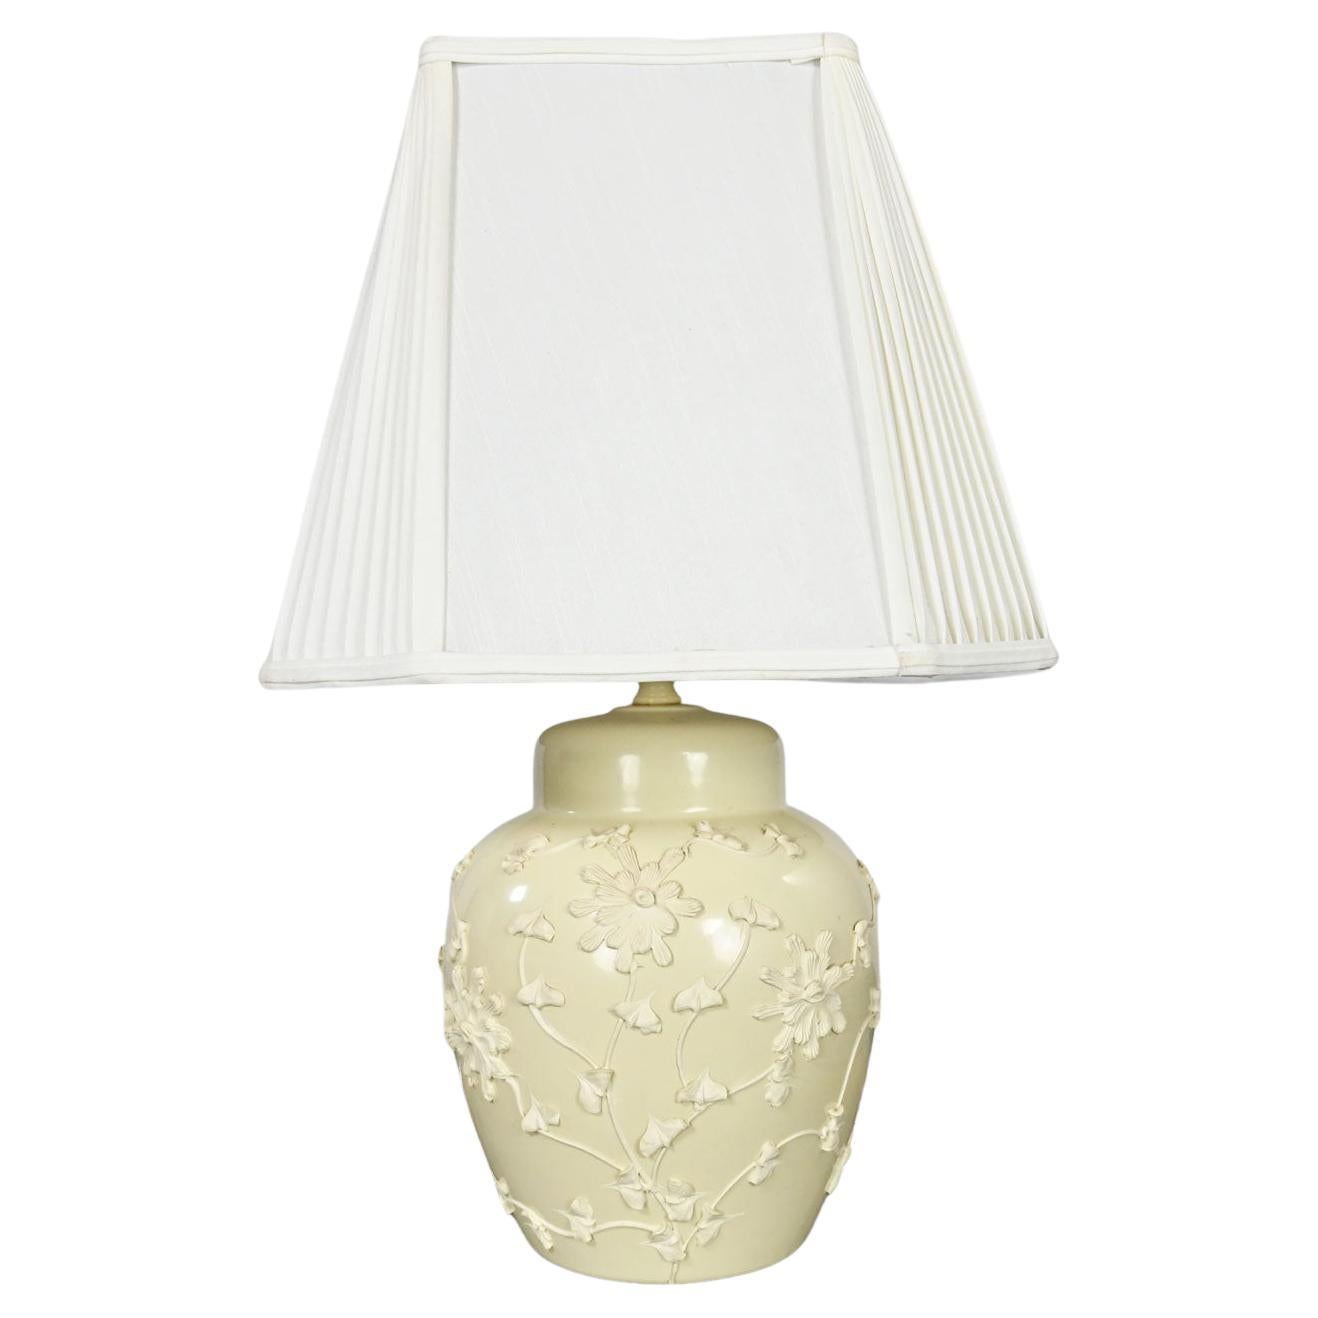 Chinoiserie Latte Clr Ginger Jar Lamp Frosting Design Pleated White Fabric Shade For Sale